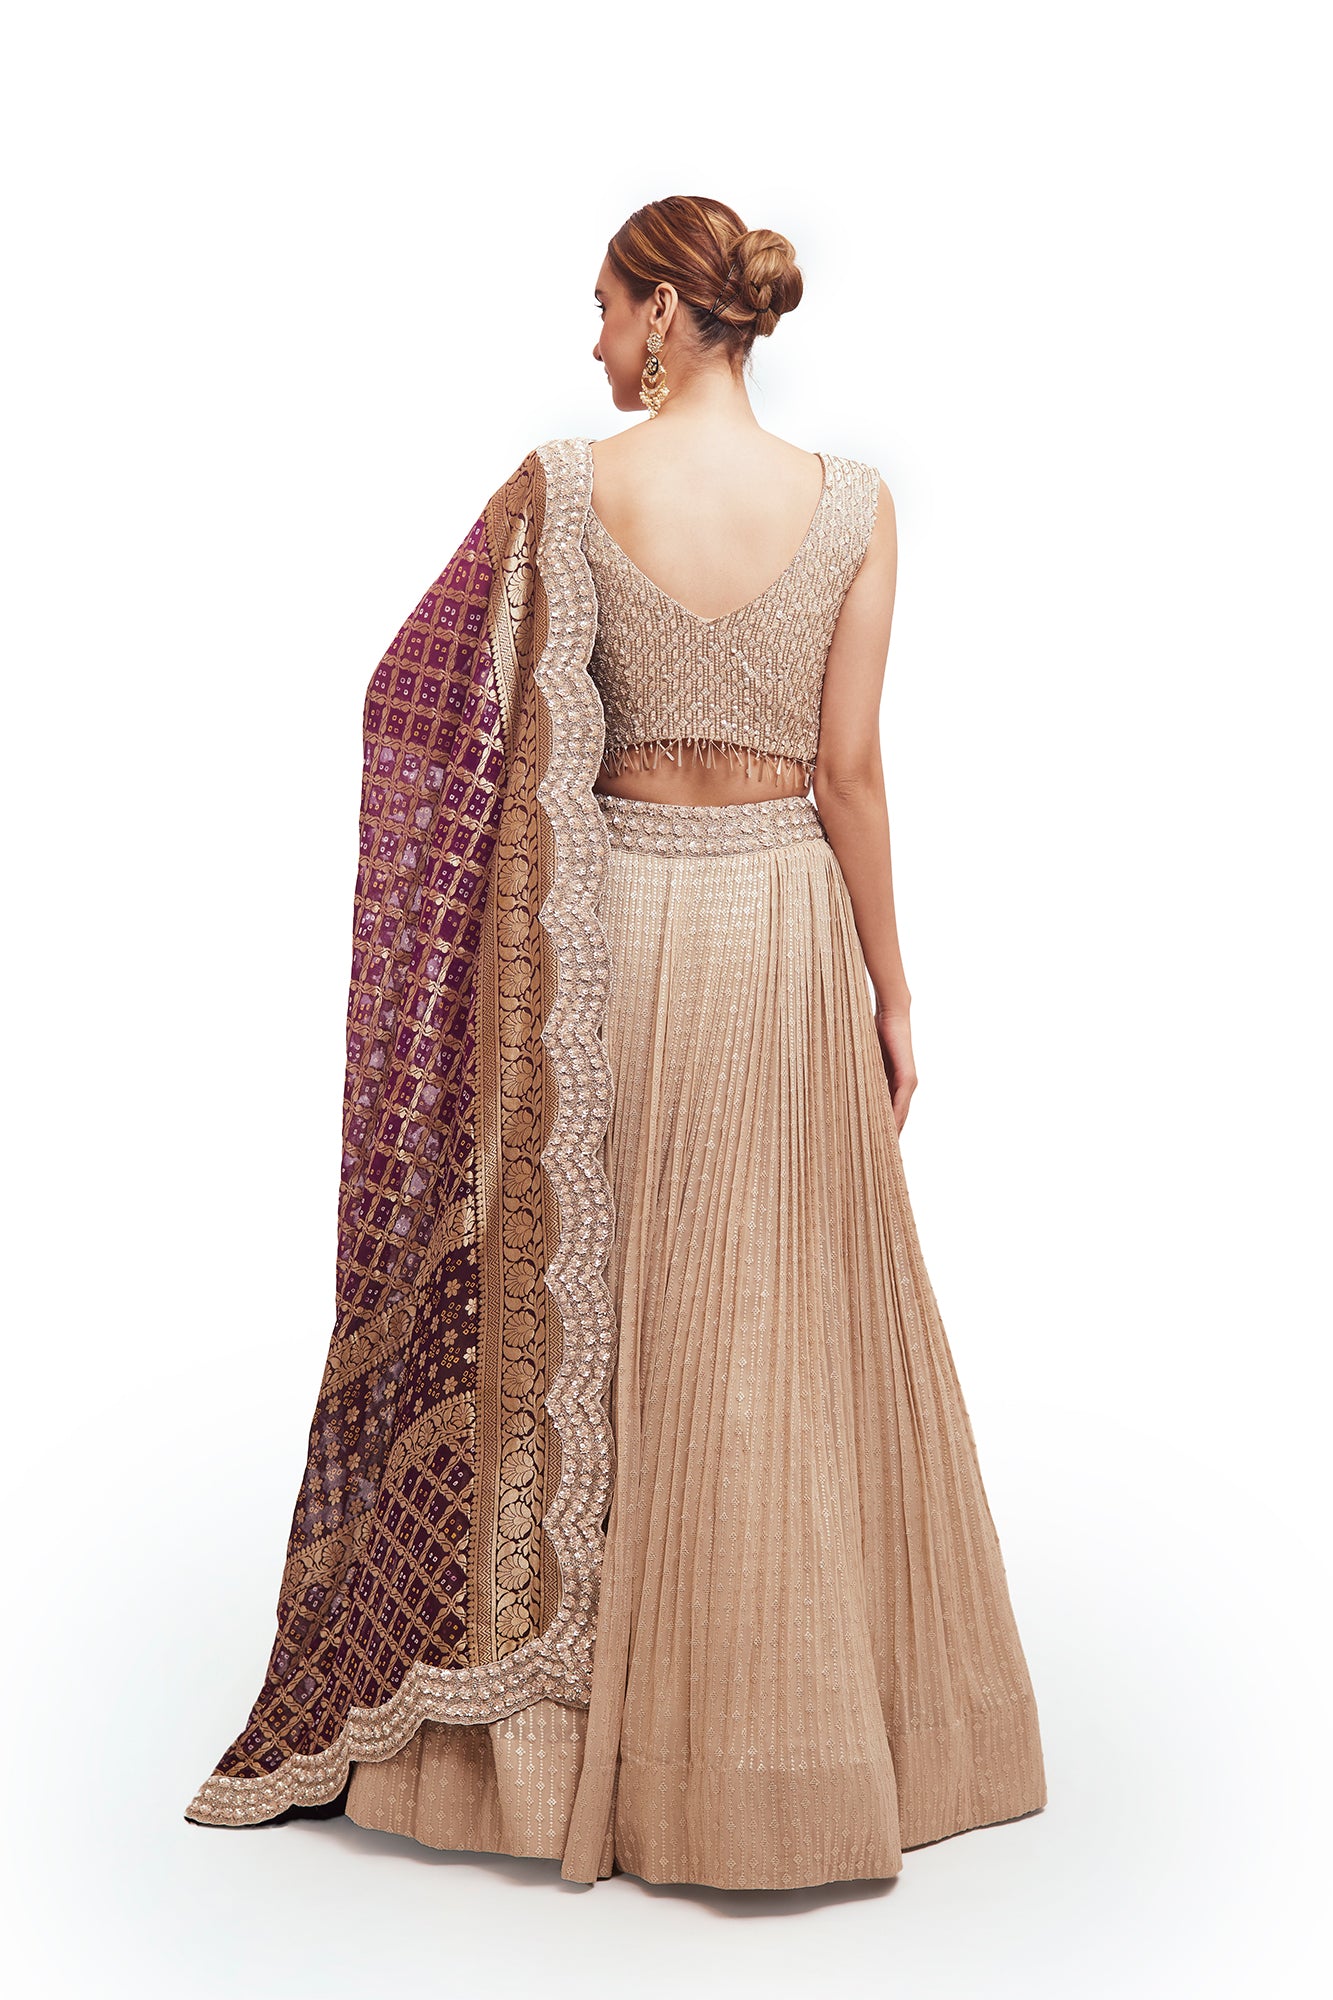 Buy off-white embroidered lehenga online in USA with purple zari dupatta. Dazzle on weddings and special occasions with exquisite designer lehengas, Anarkali suit, sharara suit, Indowestern outfits, bridal lehengas from Pure Elegance Indian clothing store in the USA. -back